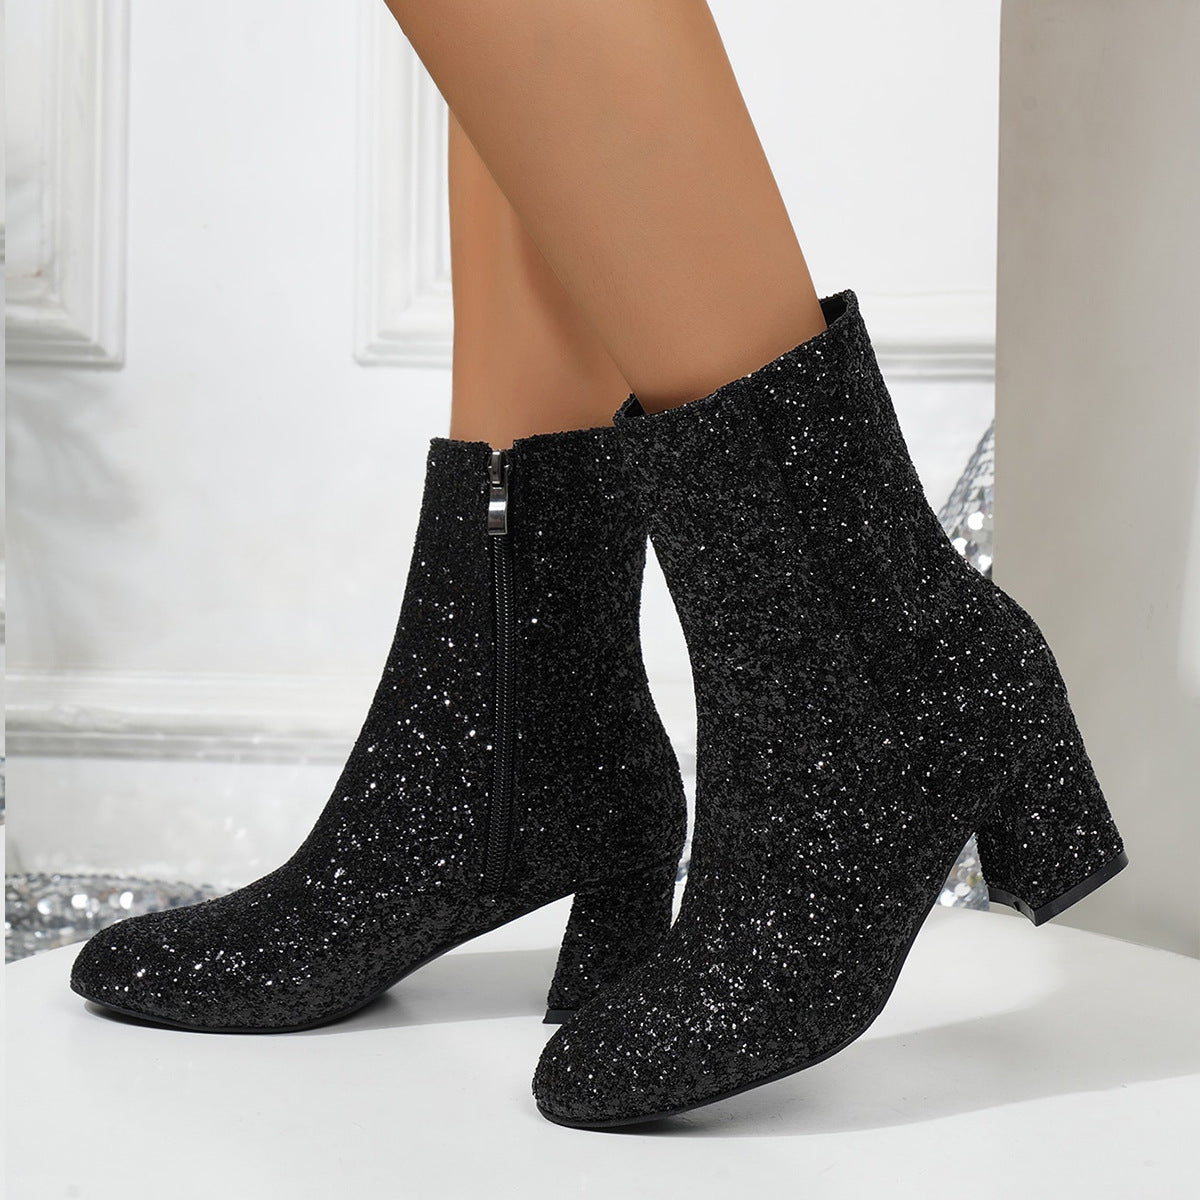 Sequin Boots For Women